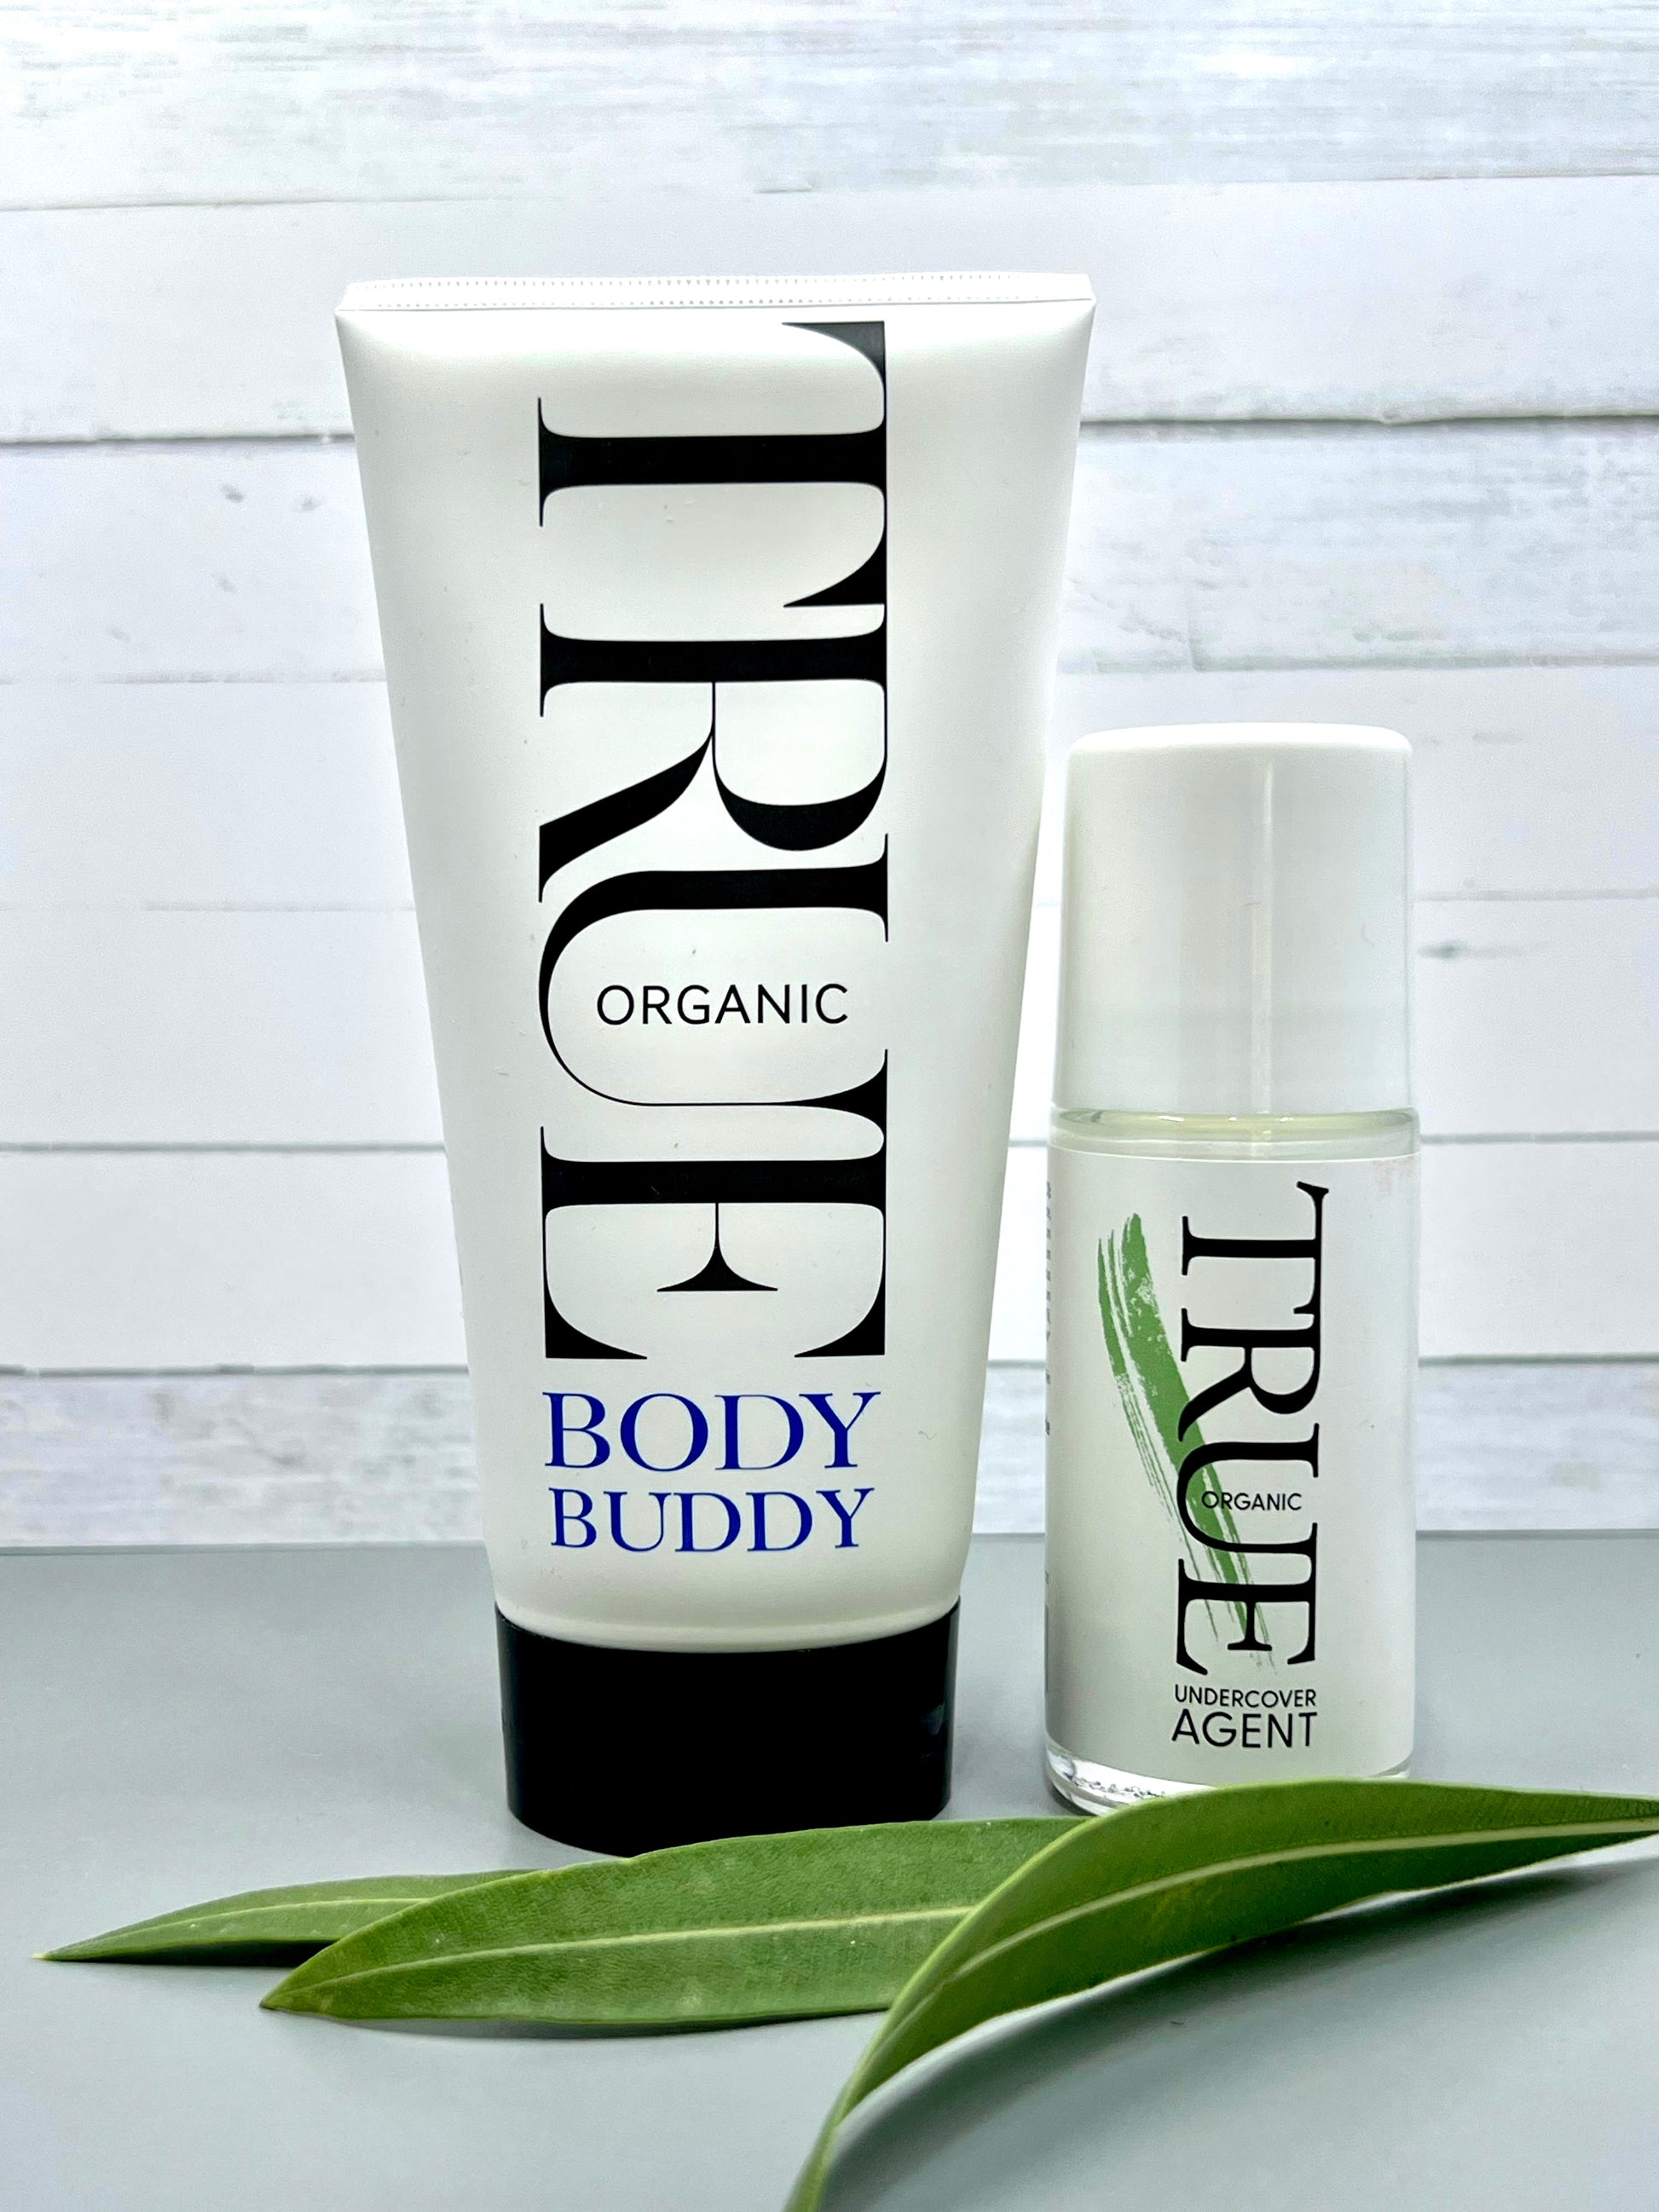 Undercover agent natural deodorant and Body buddy lotion 